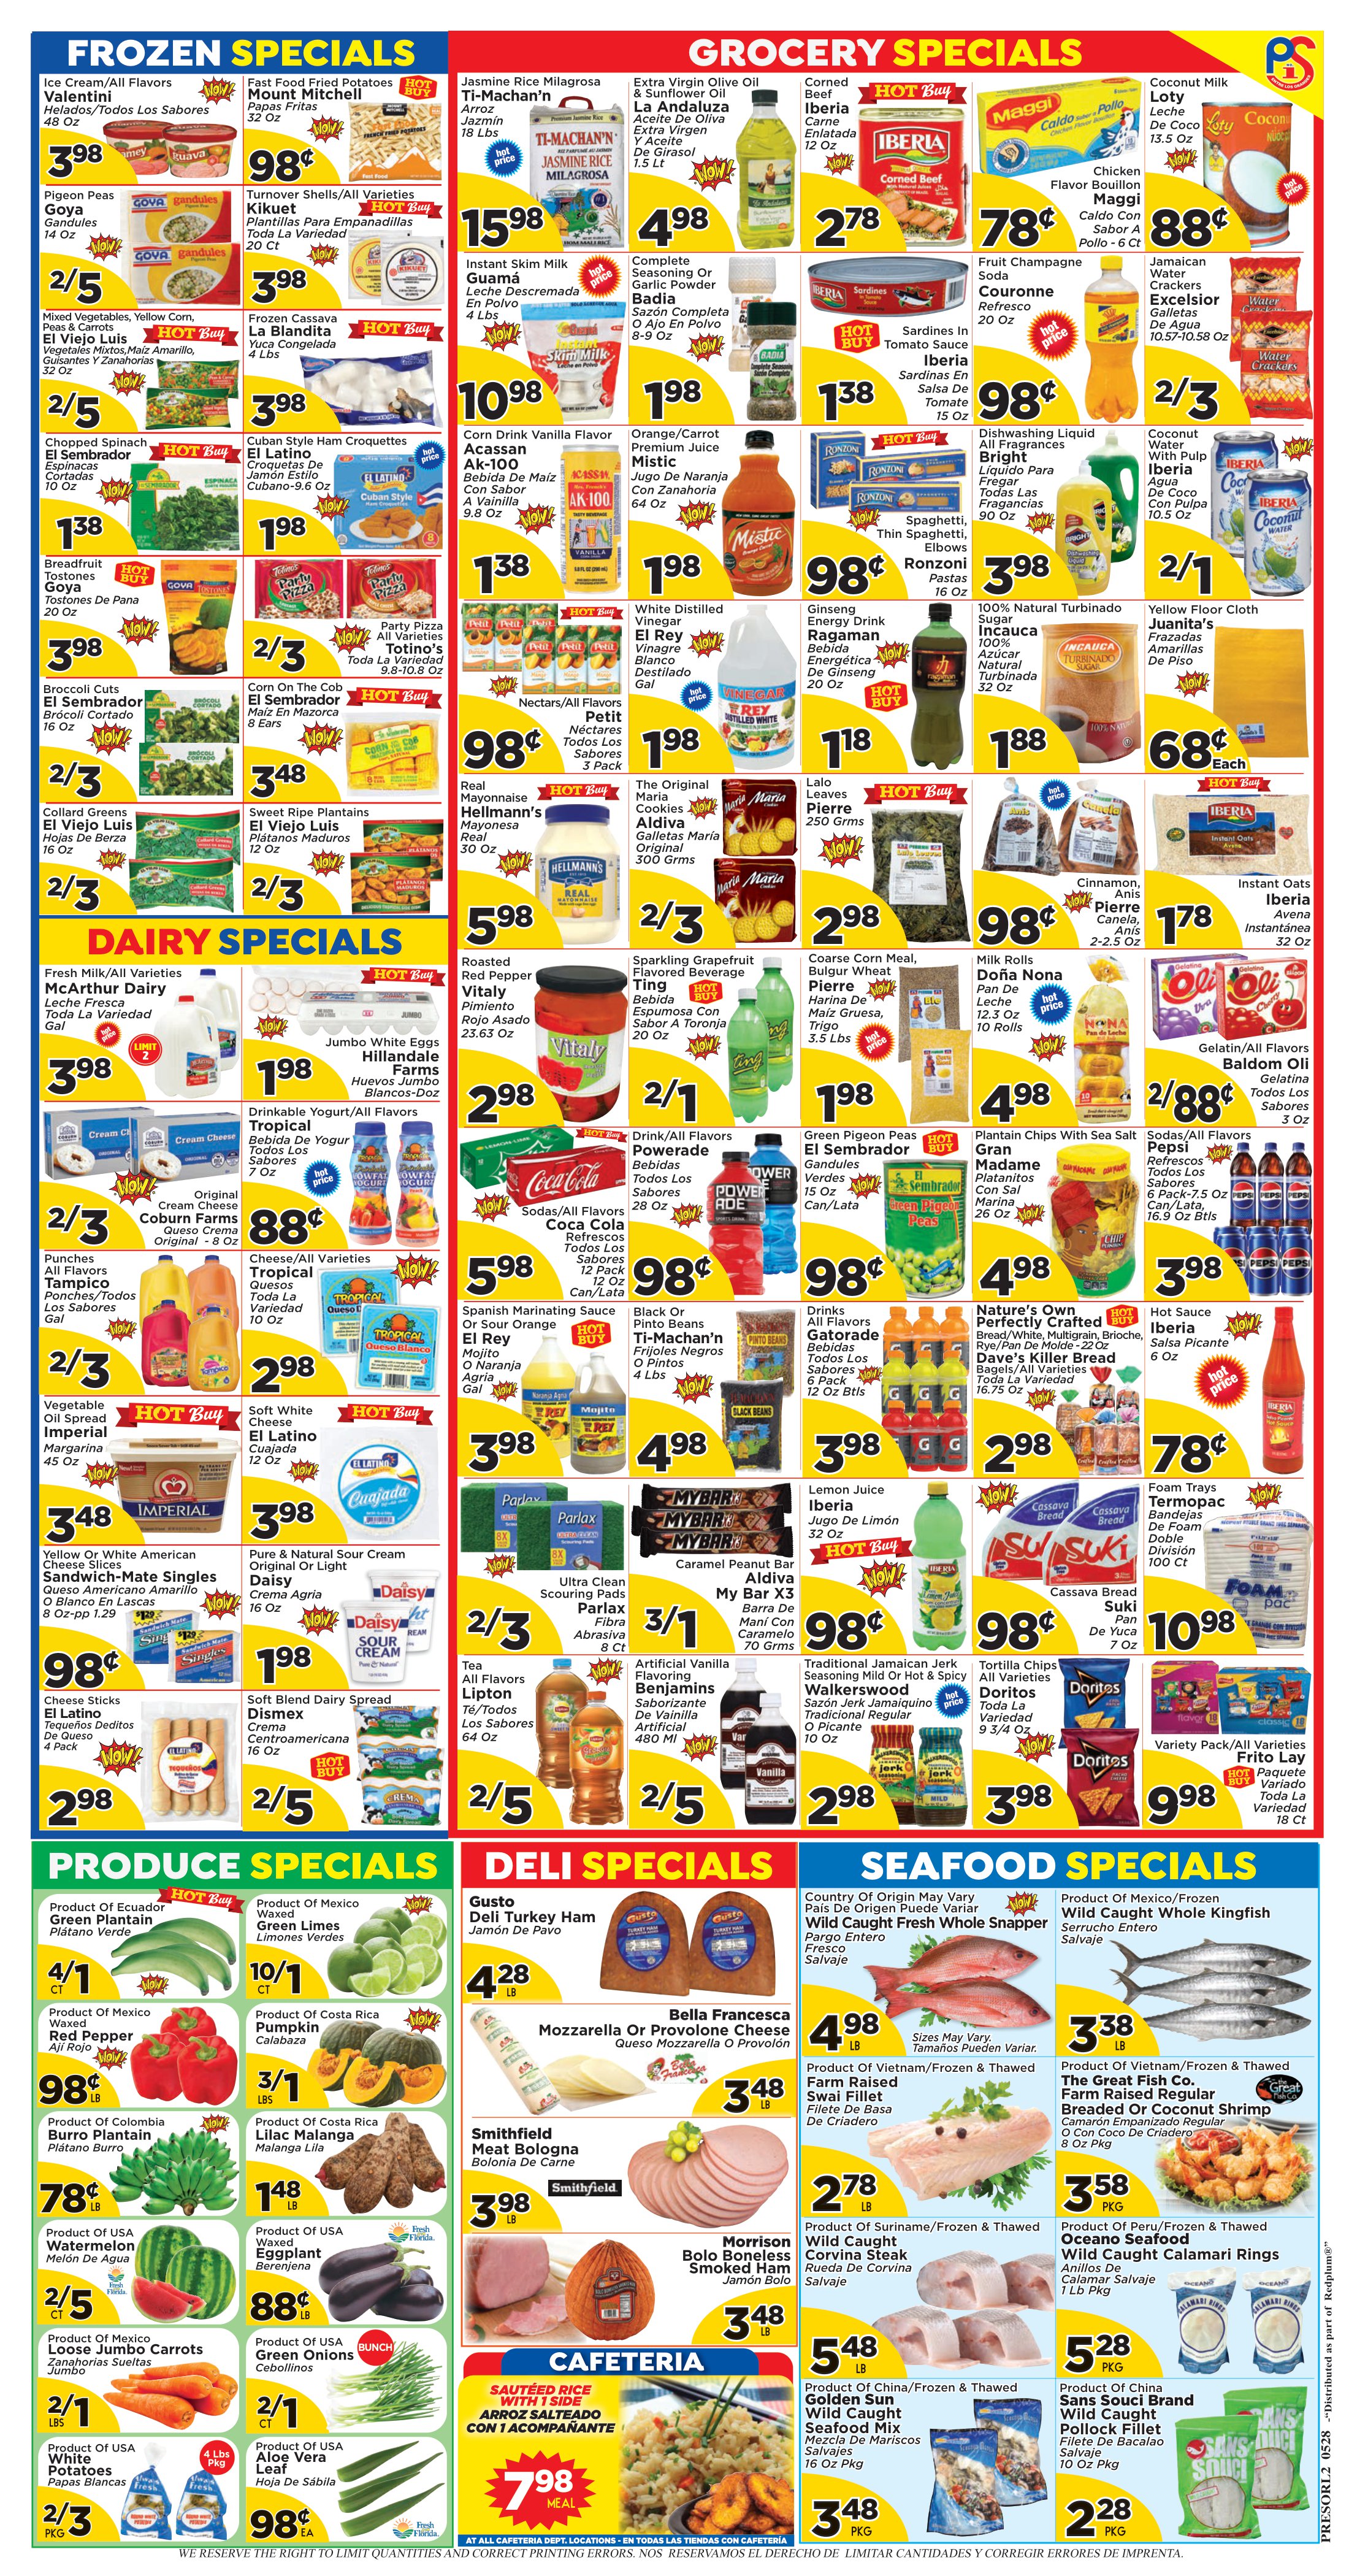 Presidente Supermarket - Weekly Promo for Store 47 - Page 2